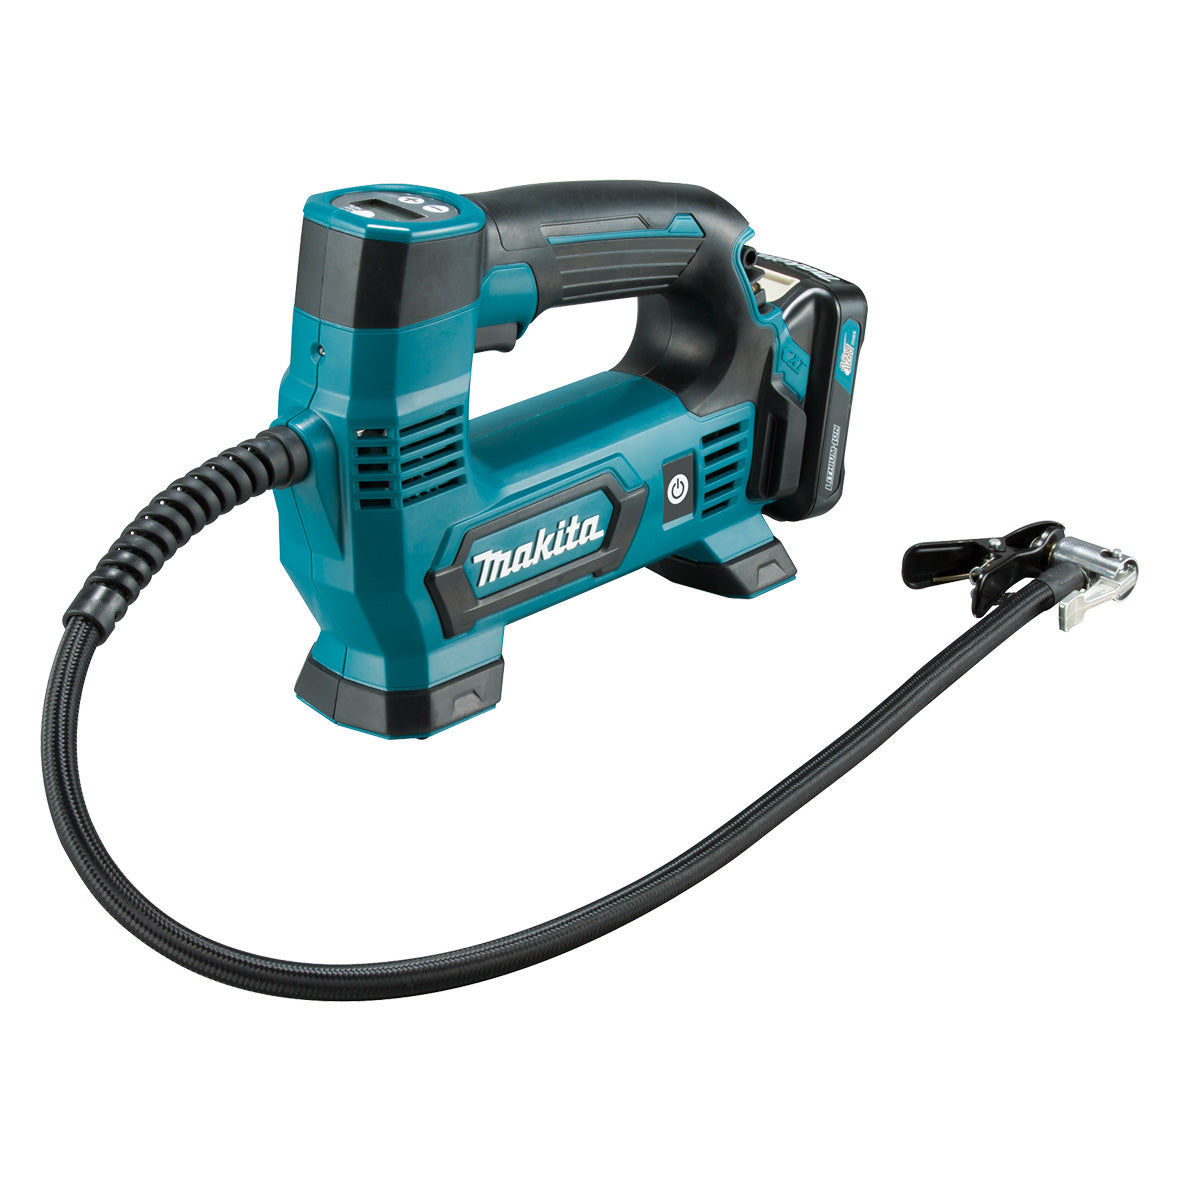 12V Max Inflator Bare (Tool Only) MP100DZ by Makita